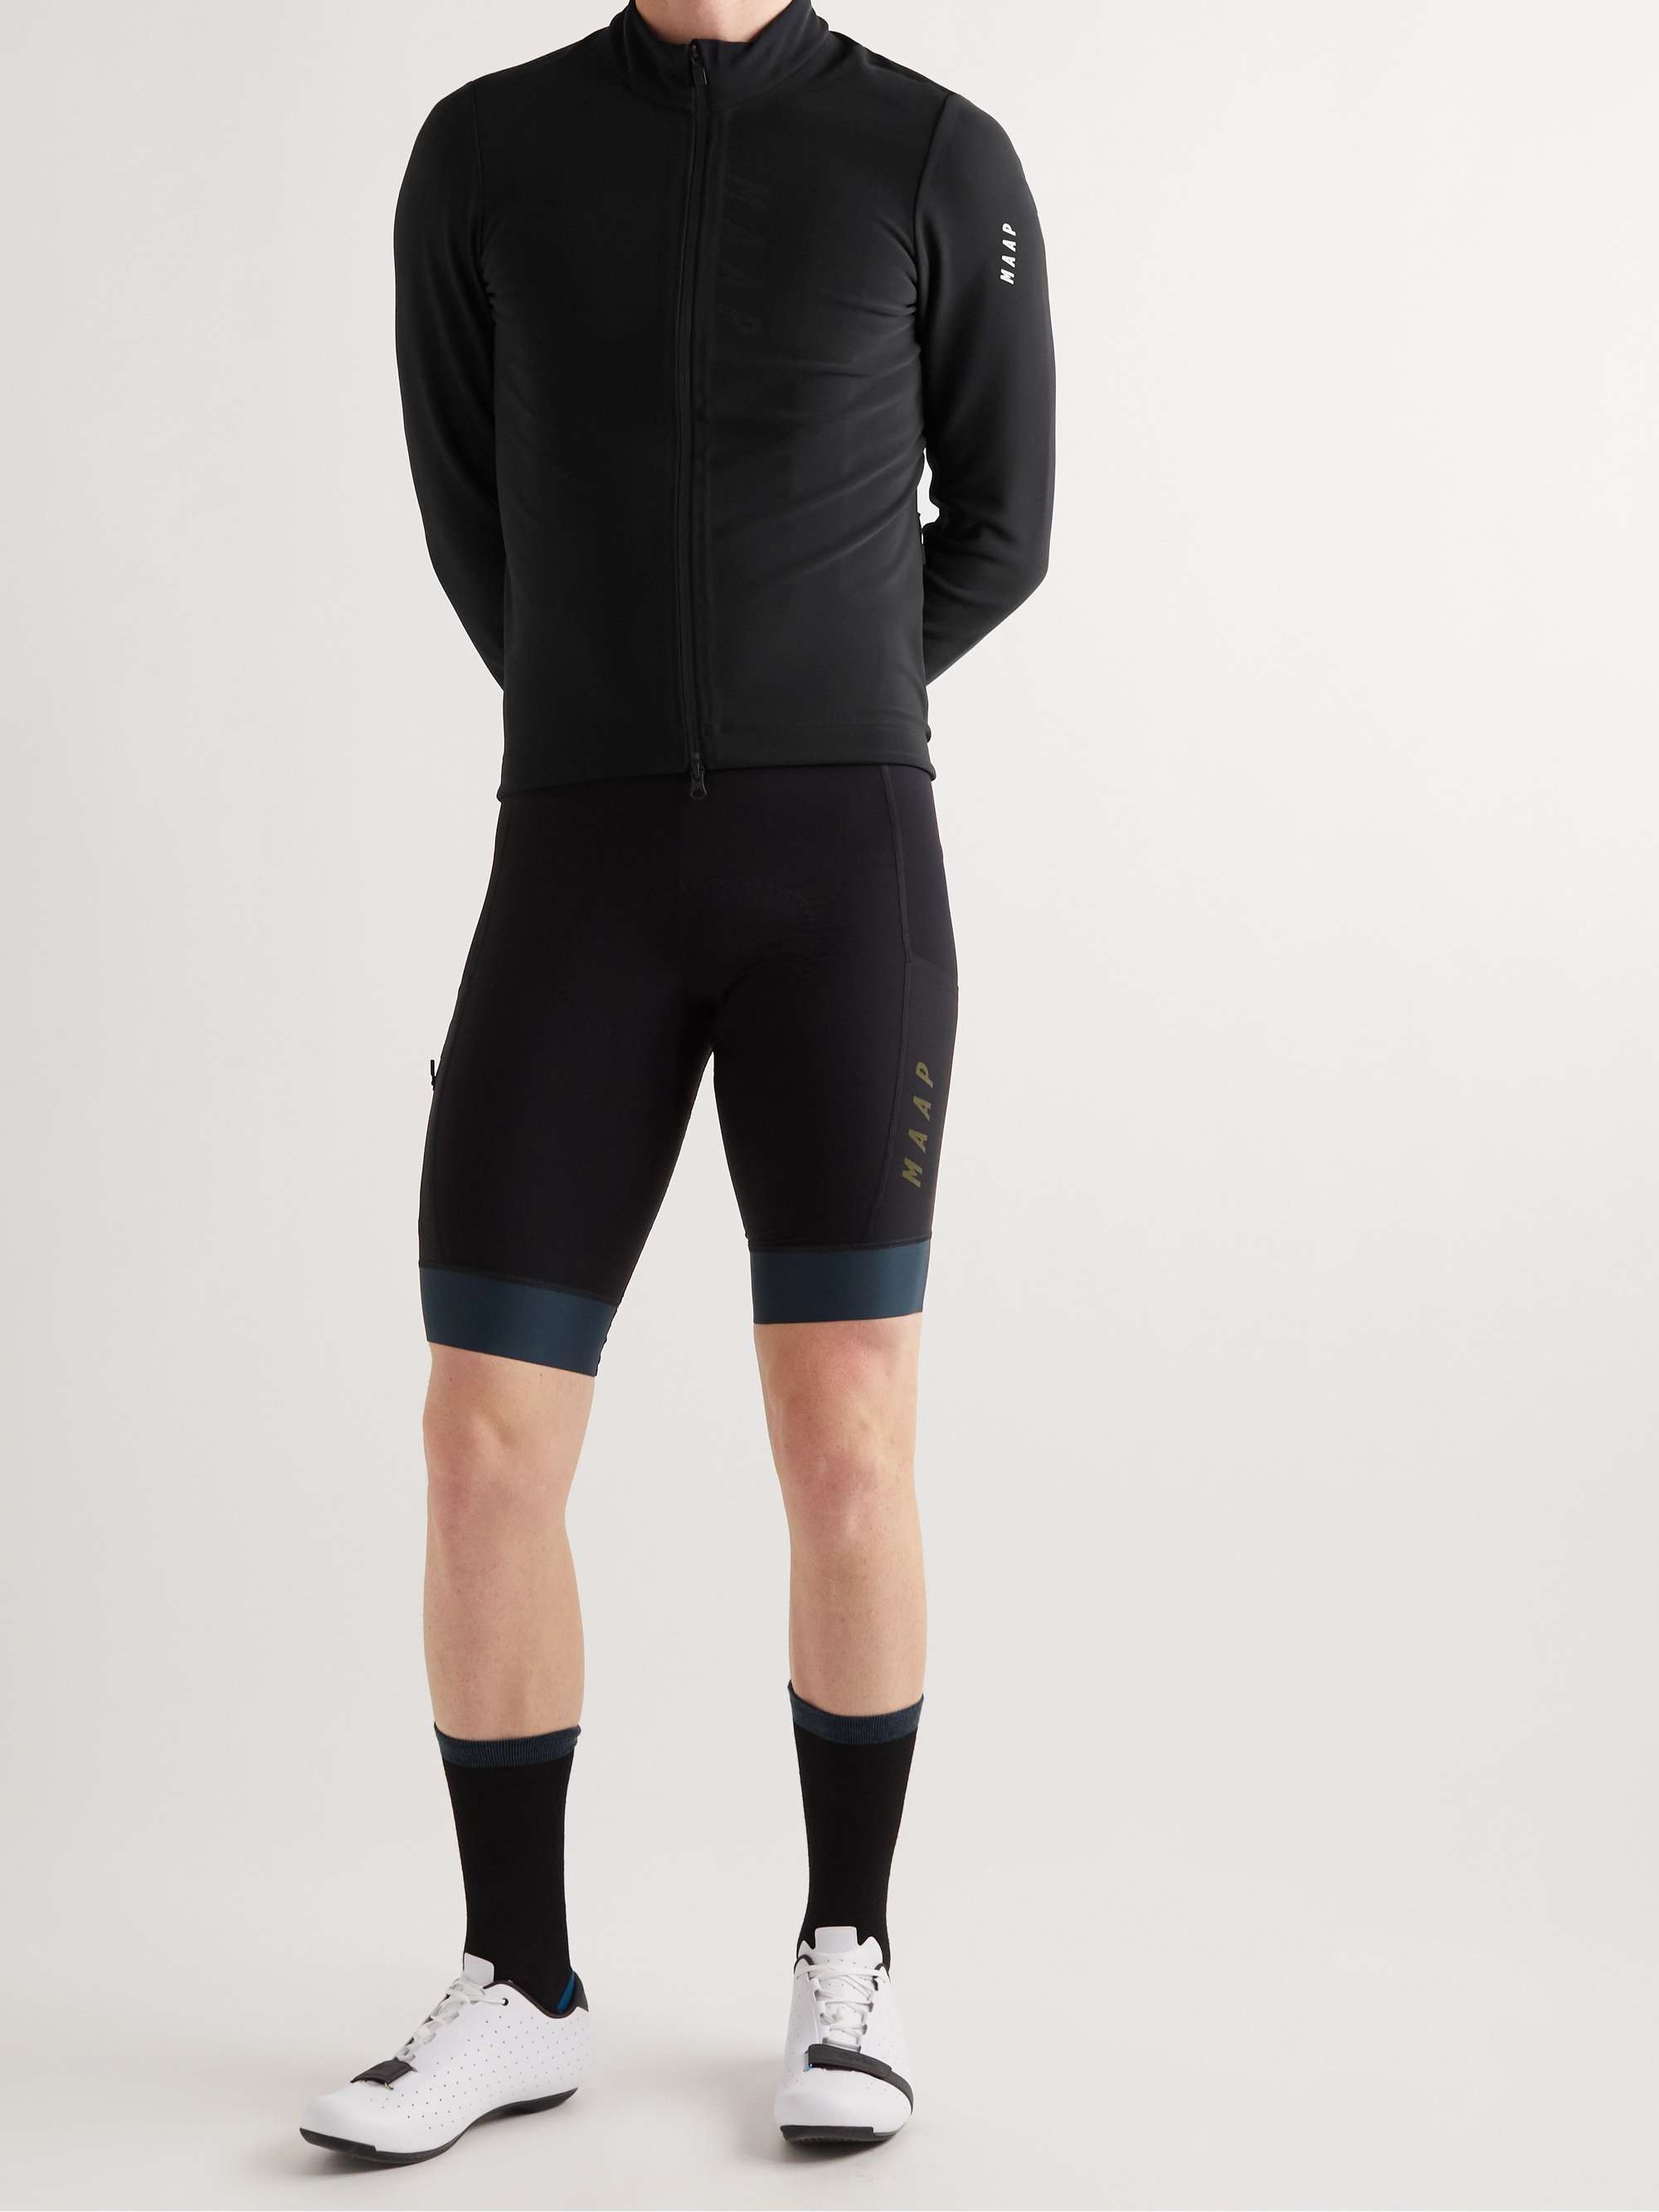 MAAP Apex 2.0 Slim-Fit Stretch-Jersey Cycling Jacket